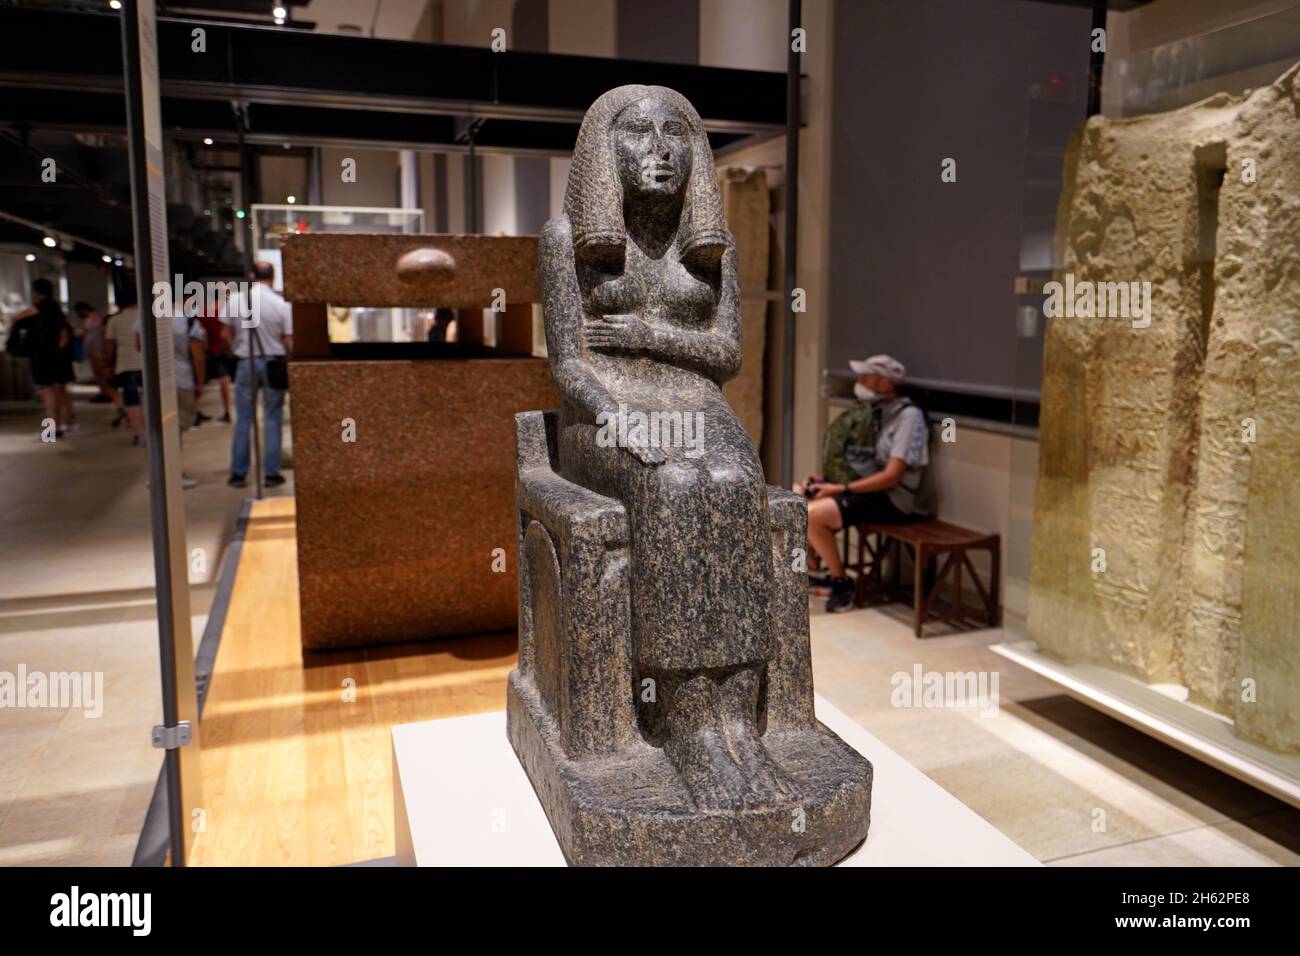 TURIN, ITALY - AUGUST 19, 2021: statue of princess Redji during the 3rd dynasty of Egyptian civilization, Egyptian Museum of Turin, Italy Stock Photo